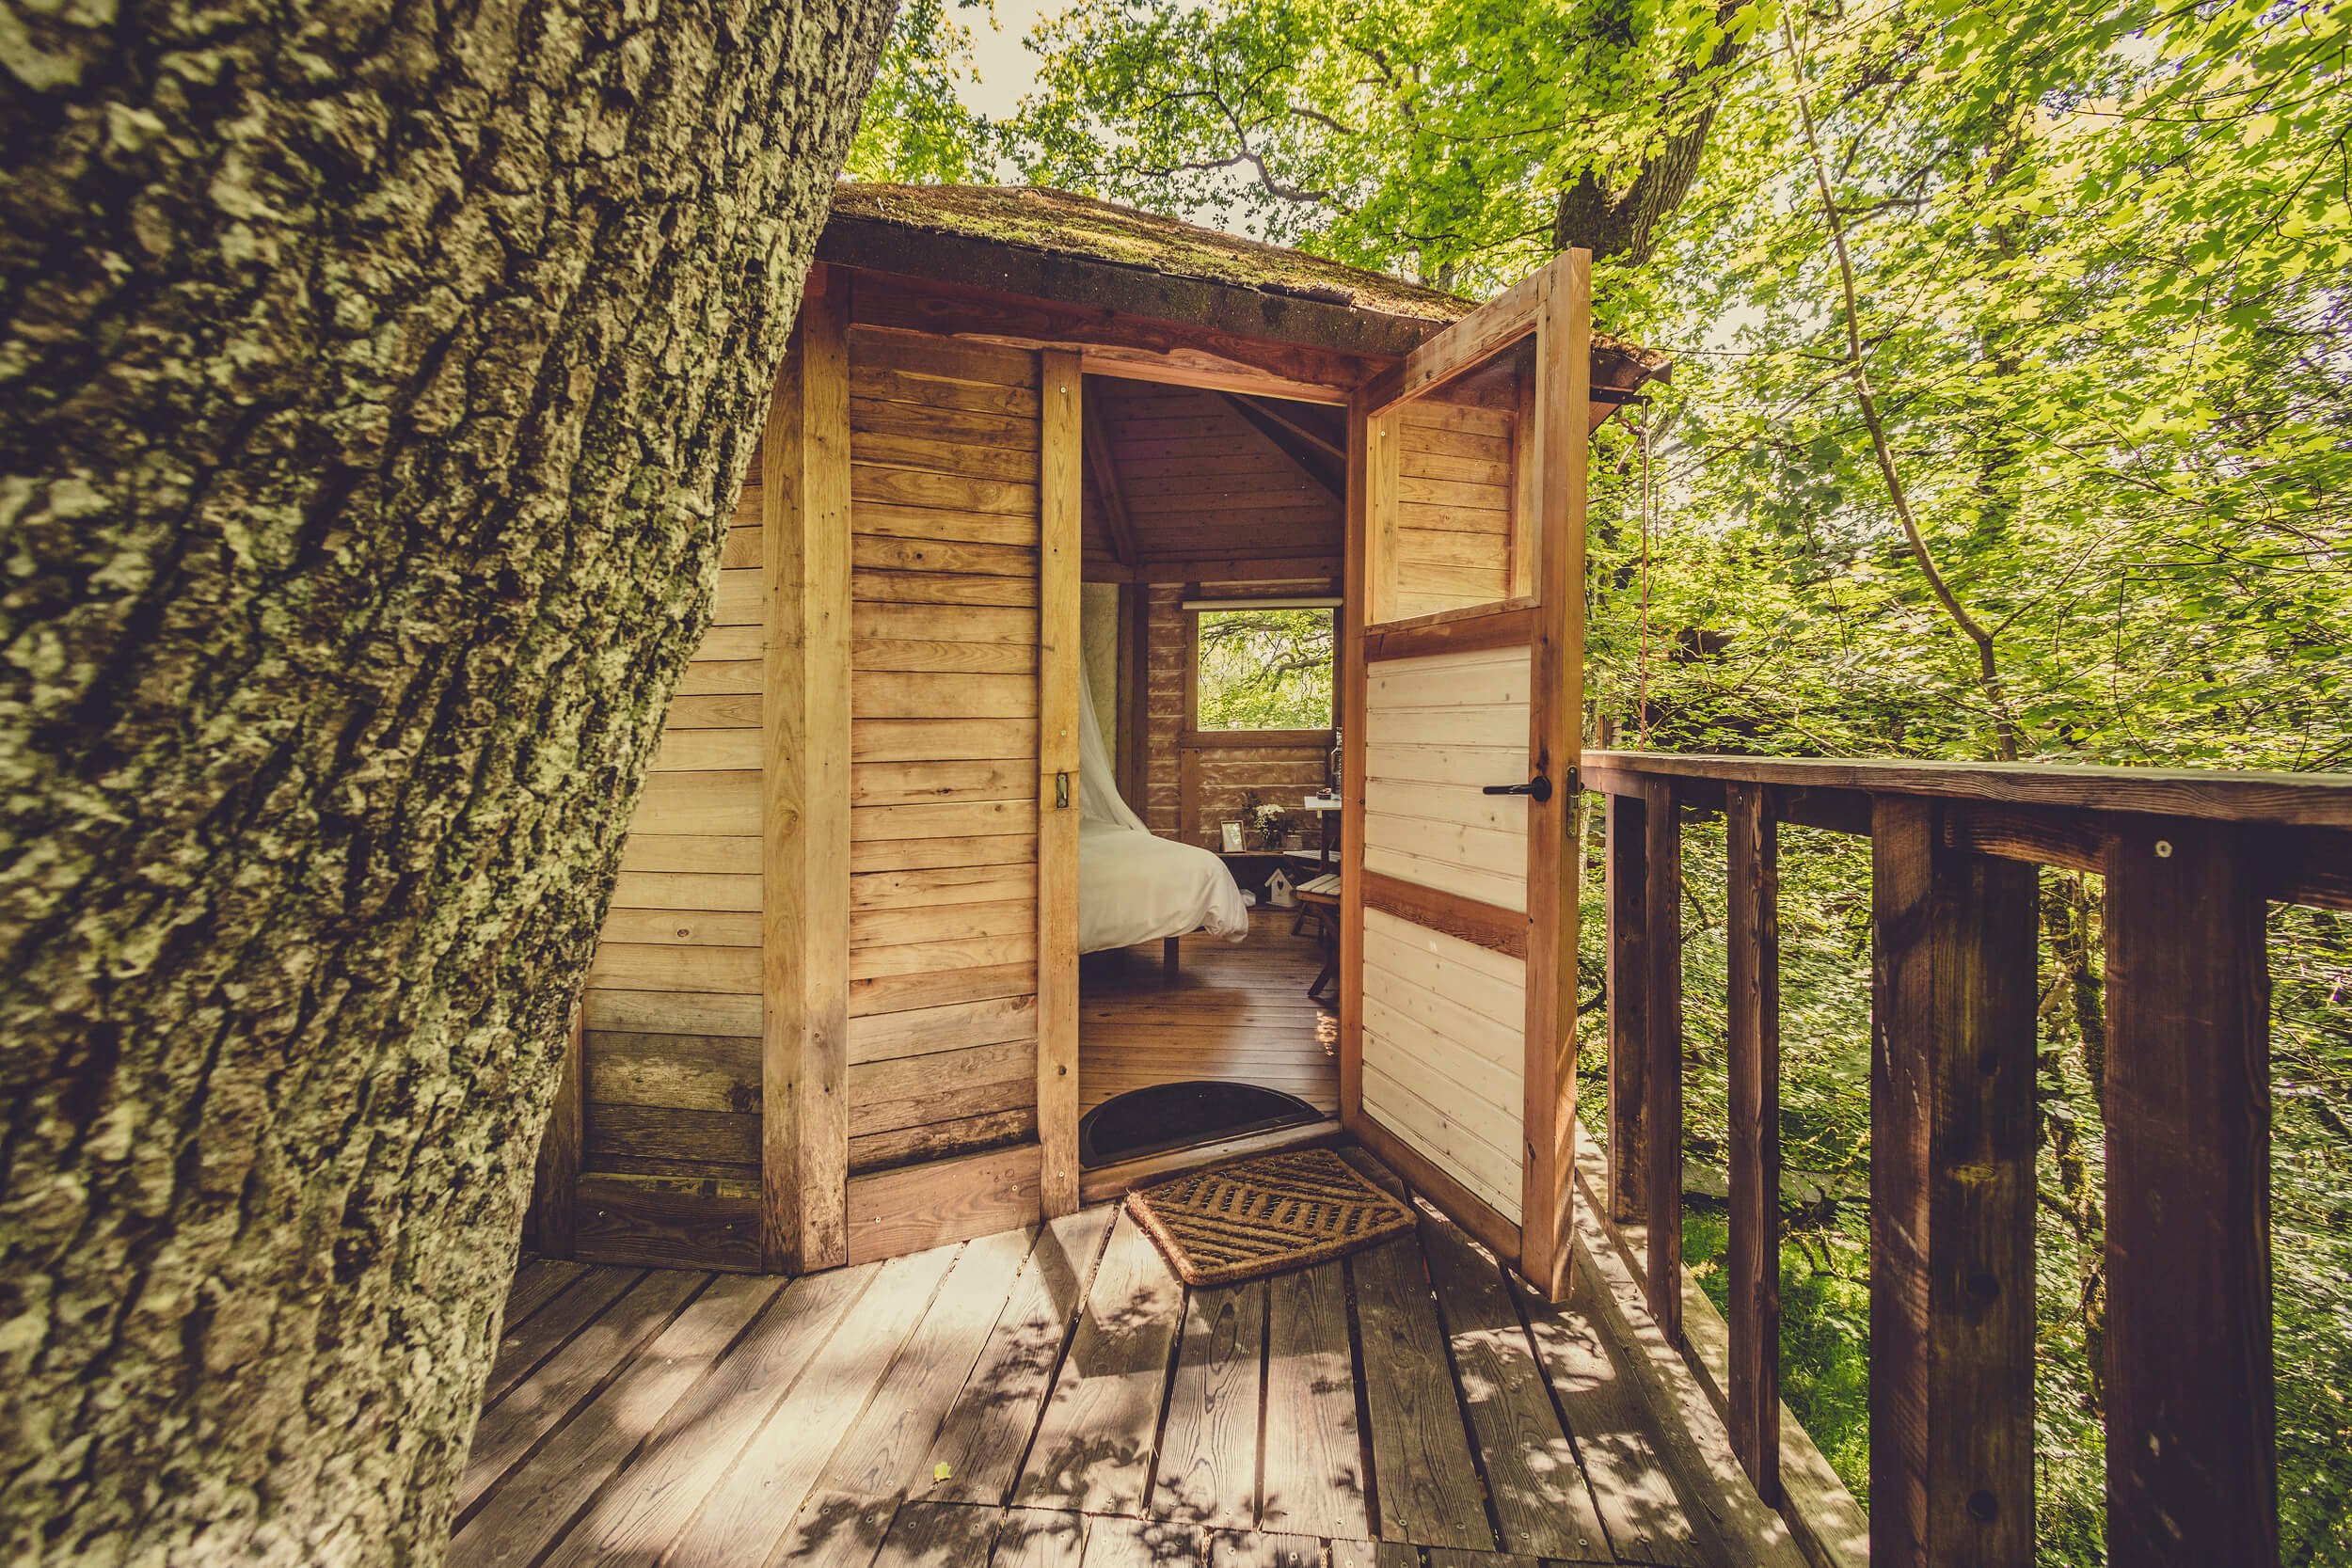 Escape to the forest- a look inside Basoa Suites' treehouses by MuruStudios advertising photographers in Madrid Barcelona Pamplona Spain 29.jpg